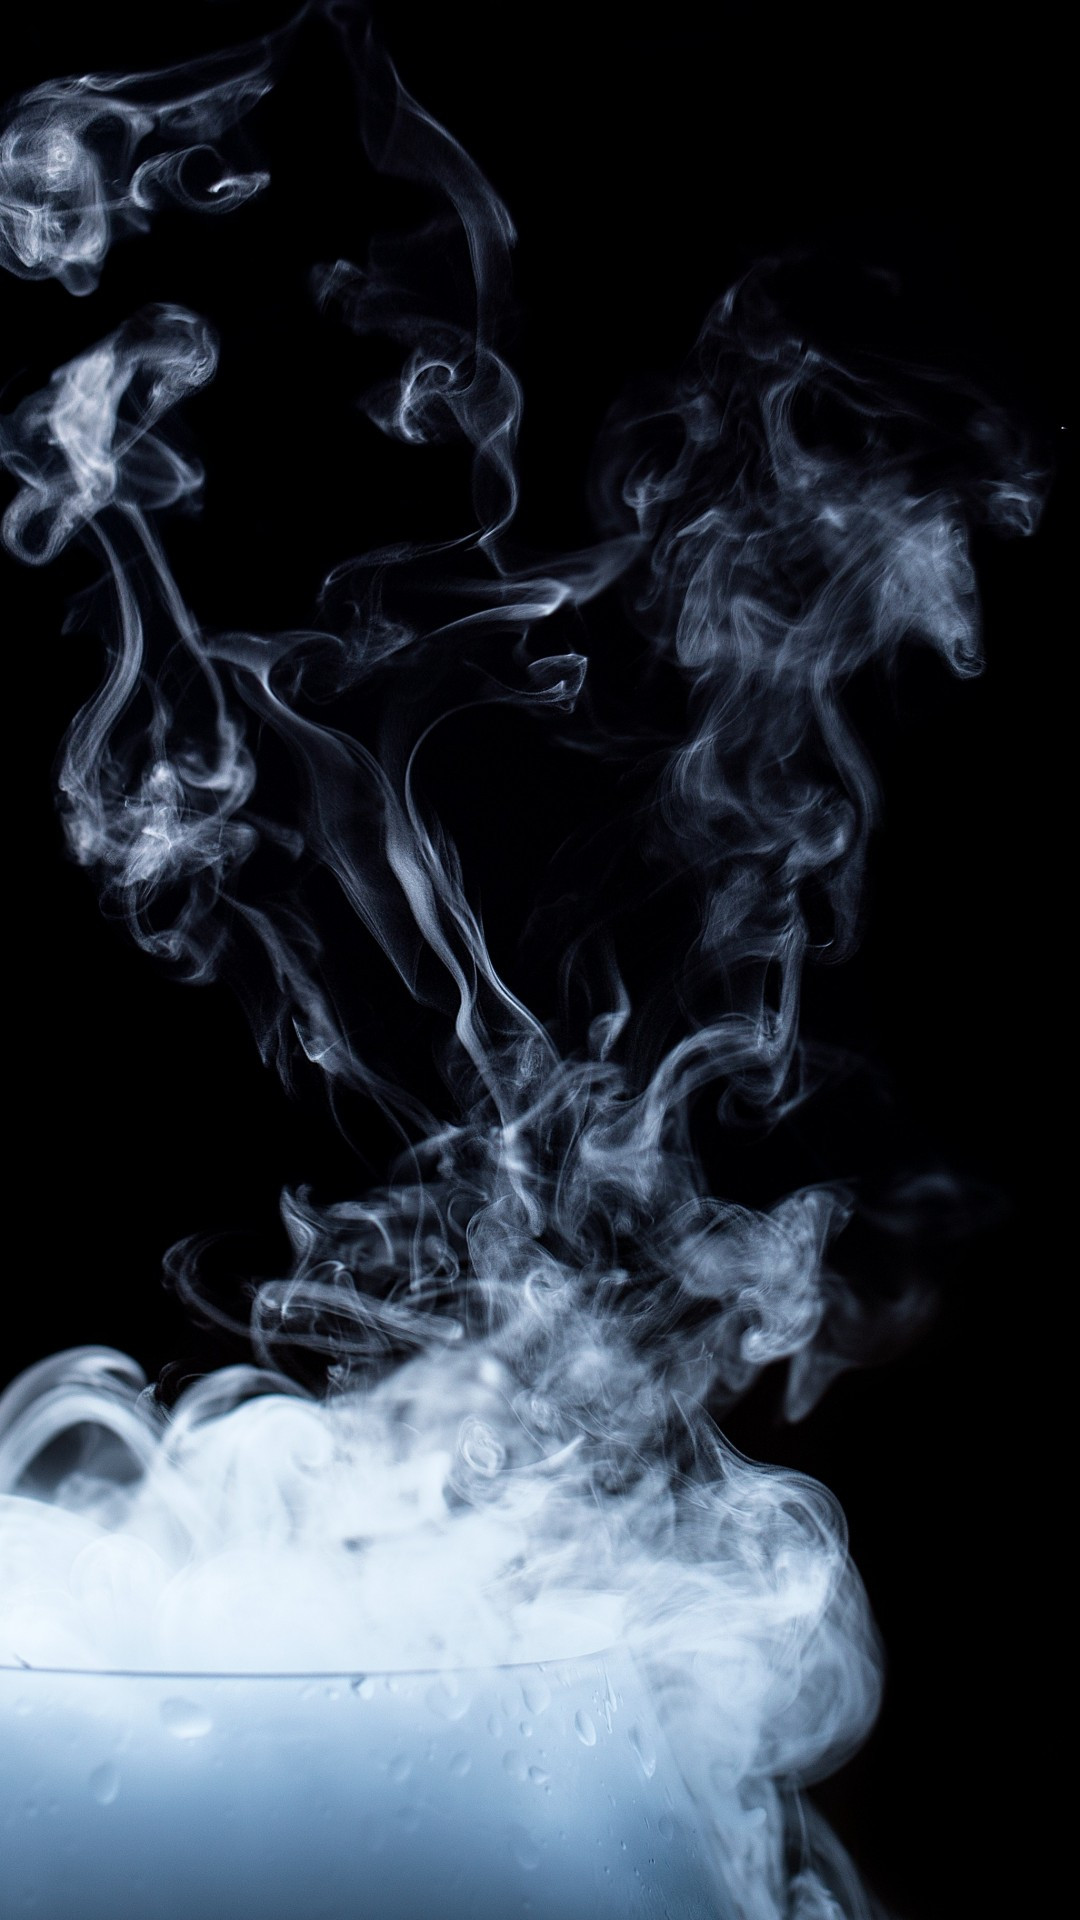 Download 1080x1920 Smoke, Glass Wallpaper for iPhone iPhone 7 Plus, iPhone 6+, Sony Xperia Z, HTC One